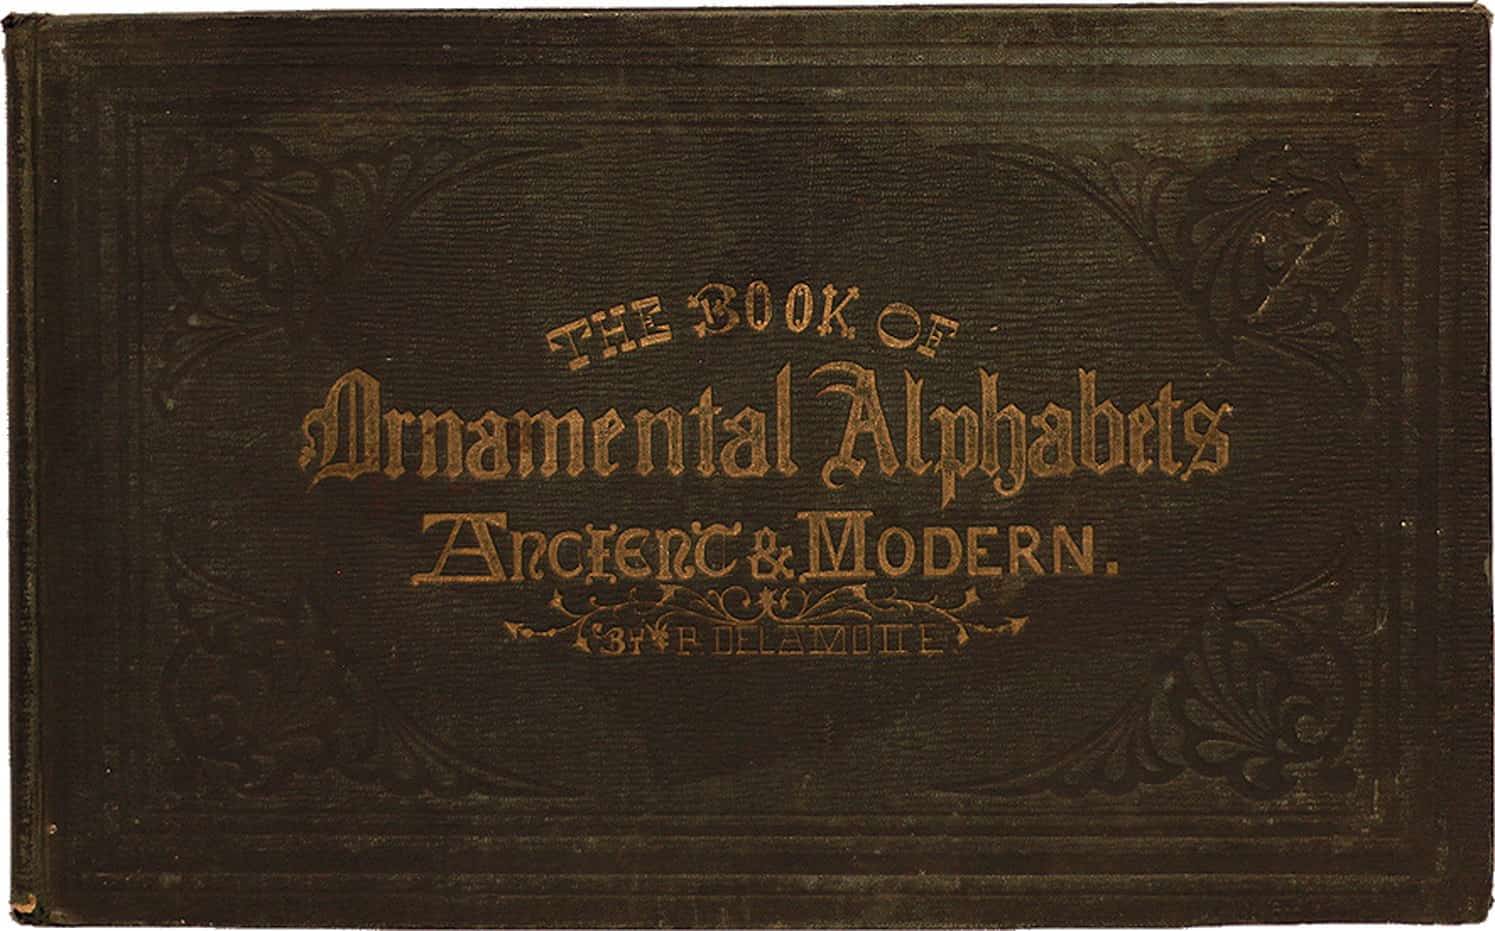 The Book of Ornamental Alphabets Ancient & Modern